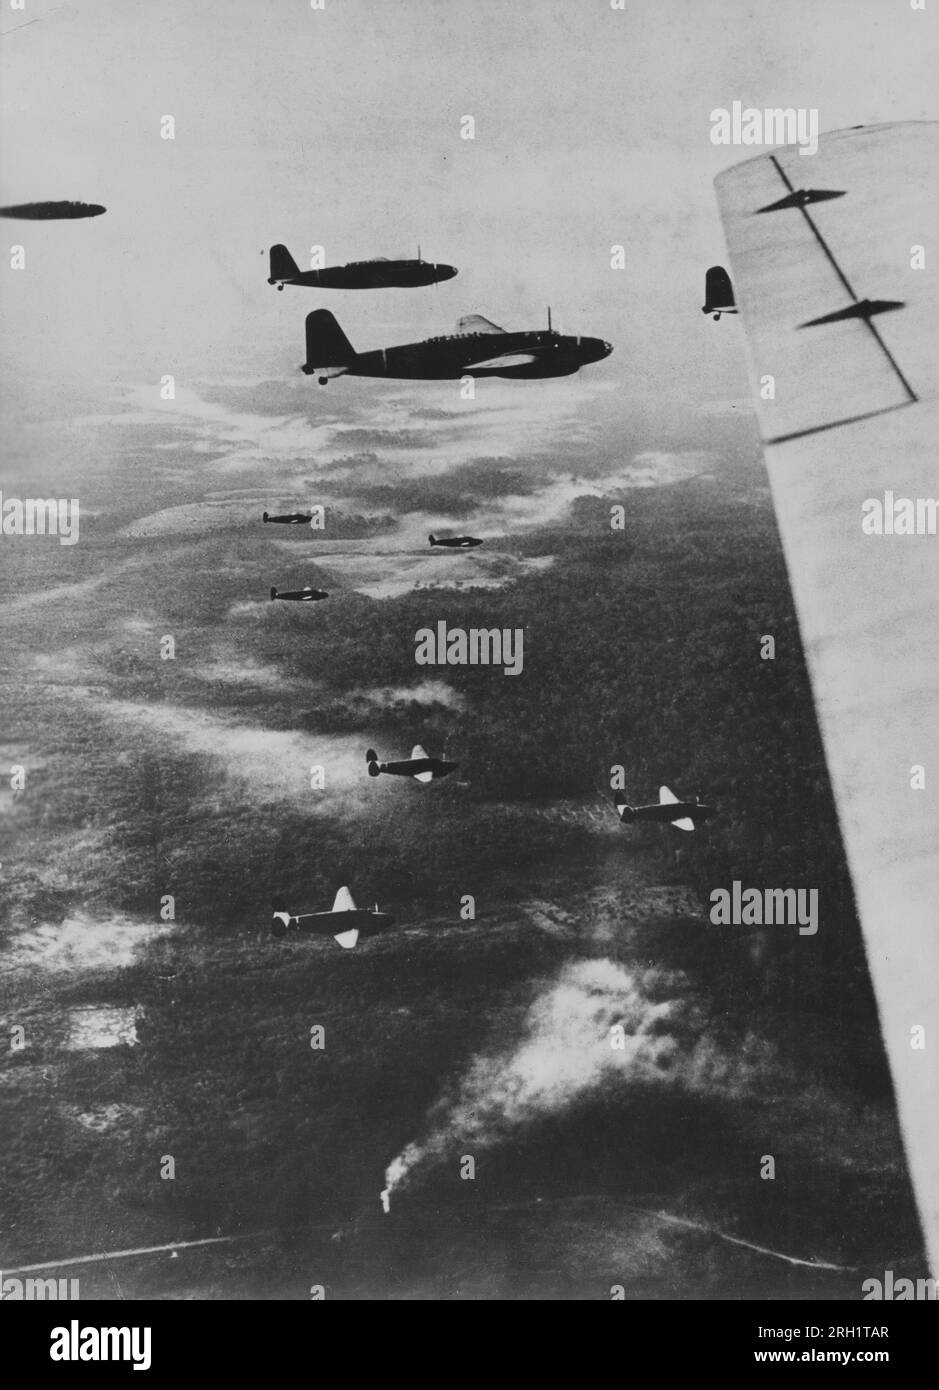 Battle of Palembang, February 13-15 1942. Imperial Japanese Army transport aircraft carrying paratroopers from the ‘Teishin Shudan’ (Raiding Group) in the skies above Musi River, Sumatra advance towards their target destination of Palembang, February 1942. Stock Photo